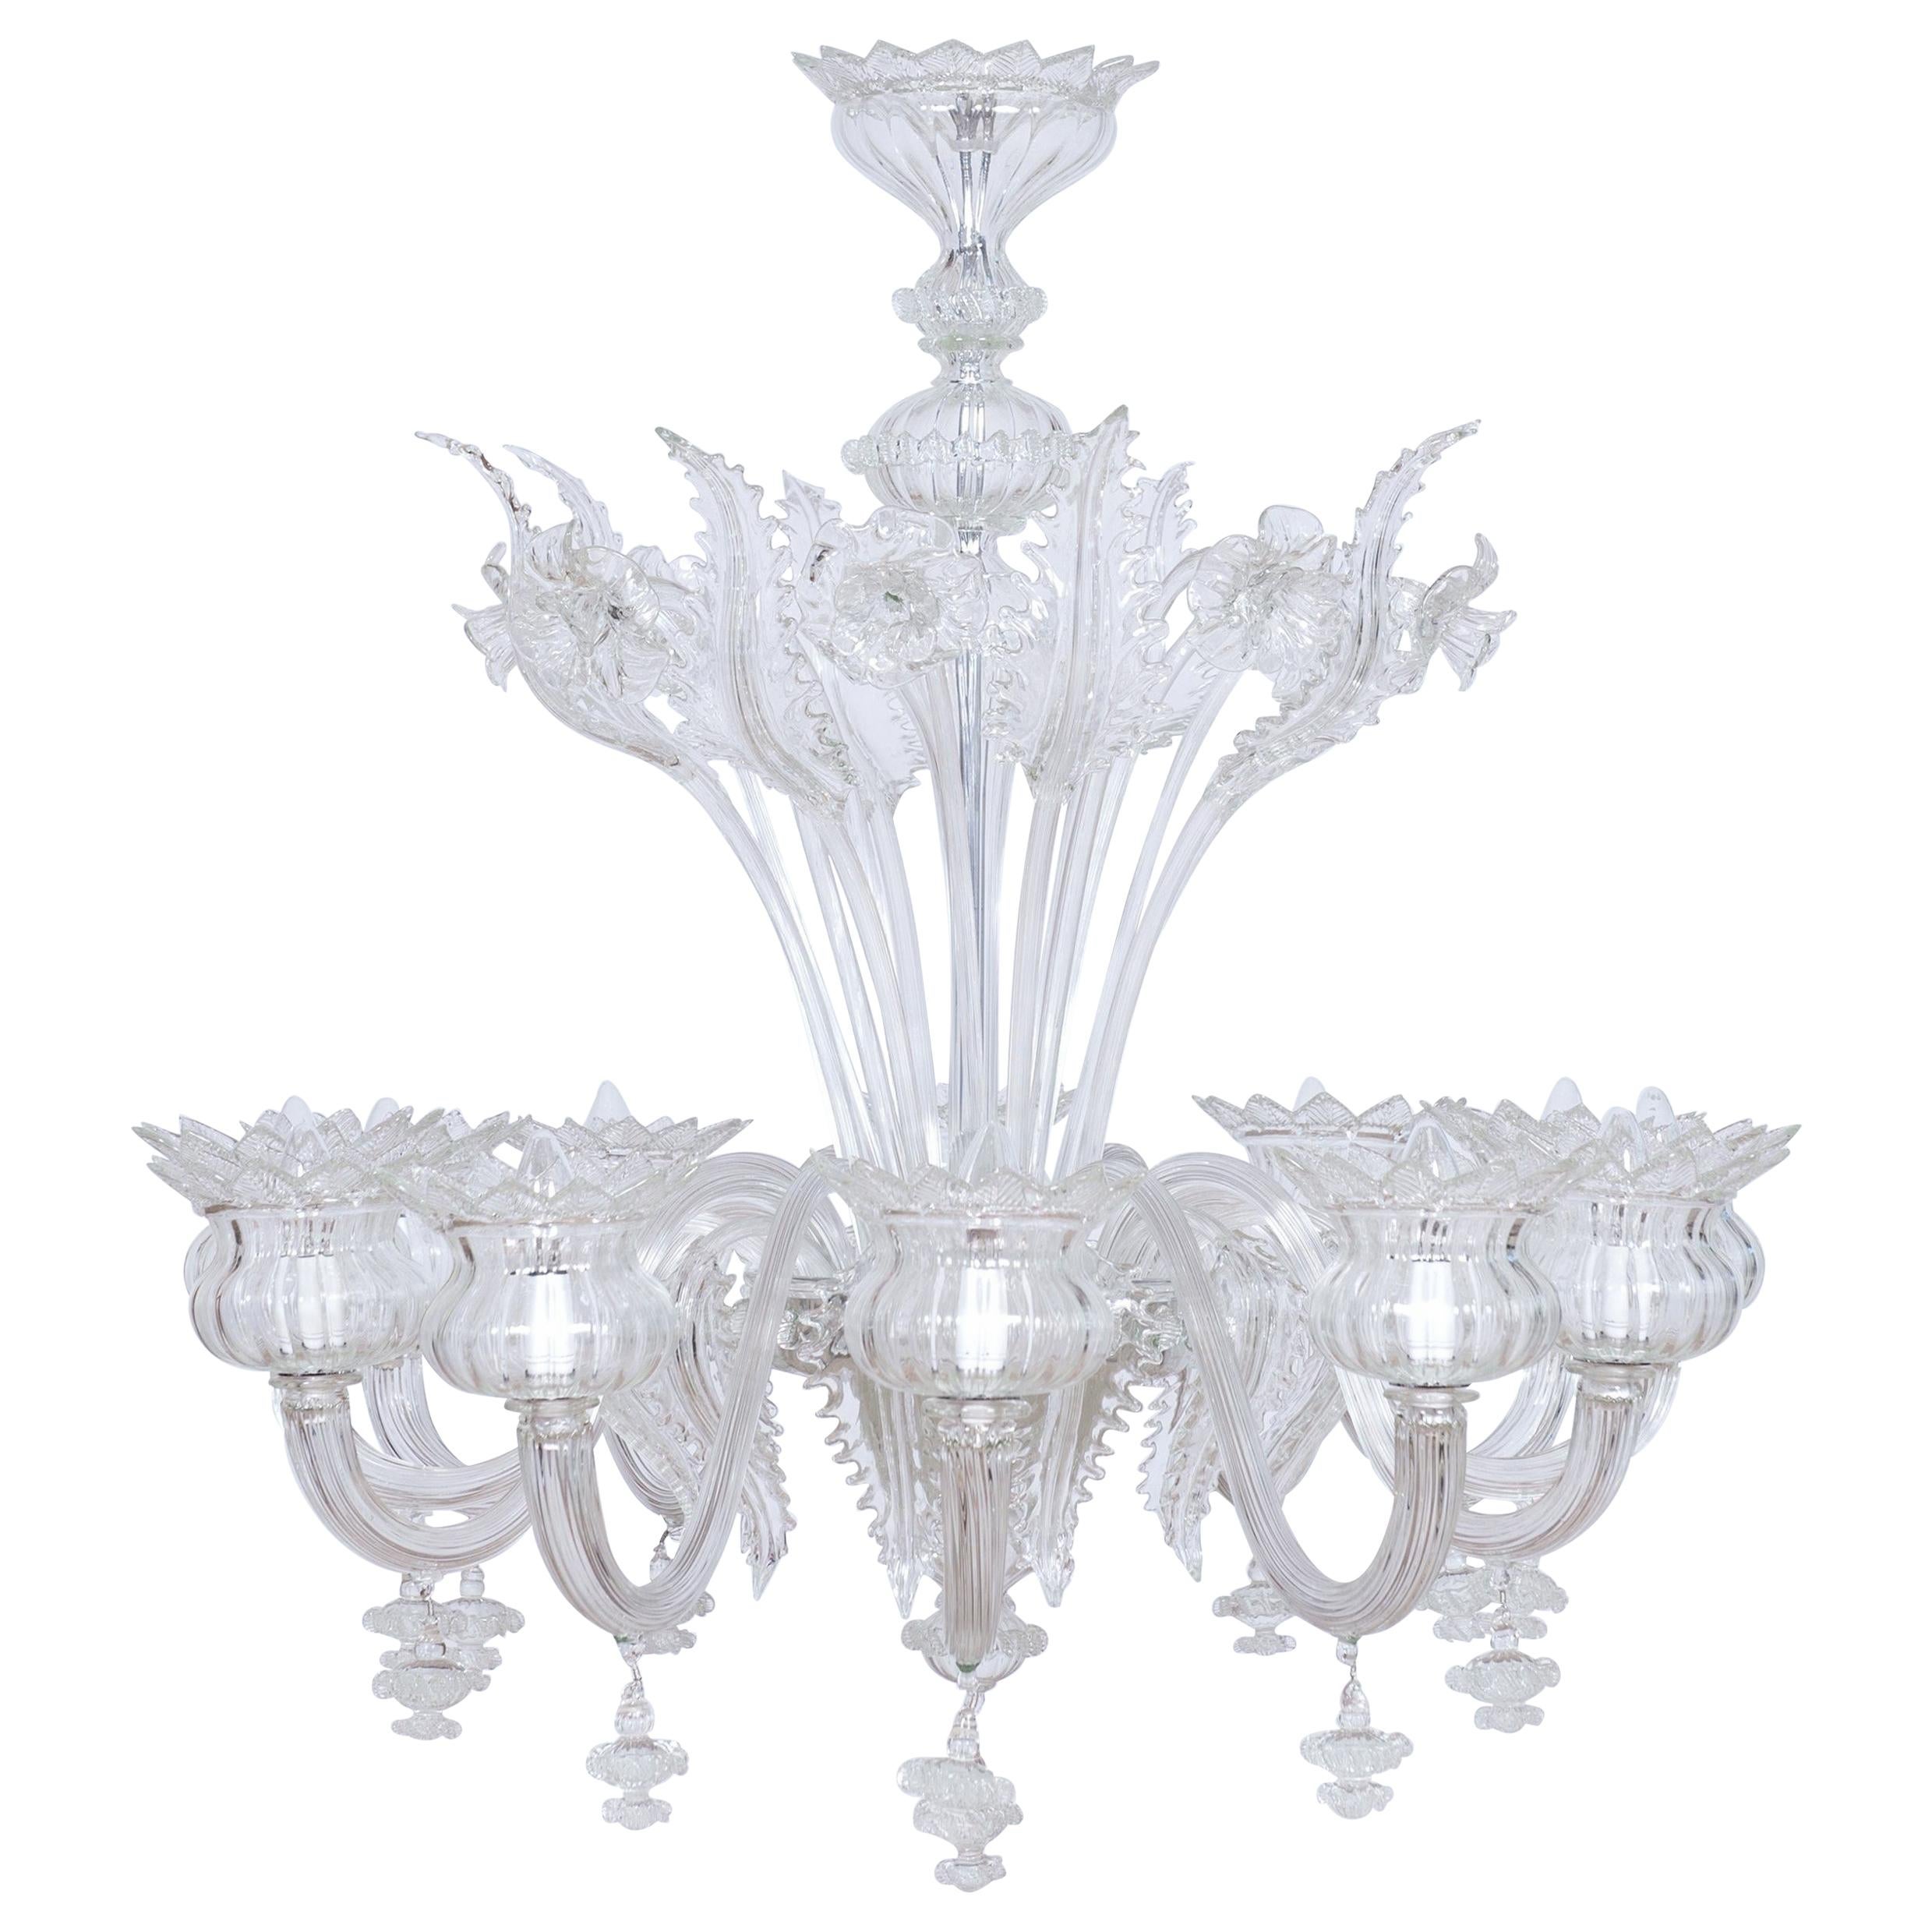 Clear Color Daisy Chandelier in Murano Glass with 12 Lights, 21st Century, Italy